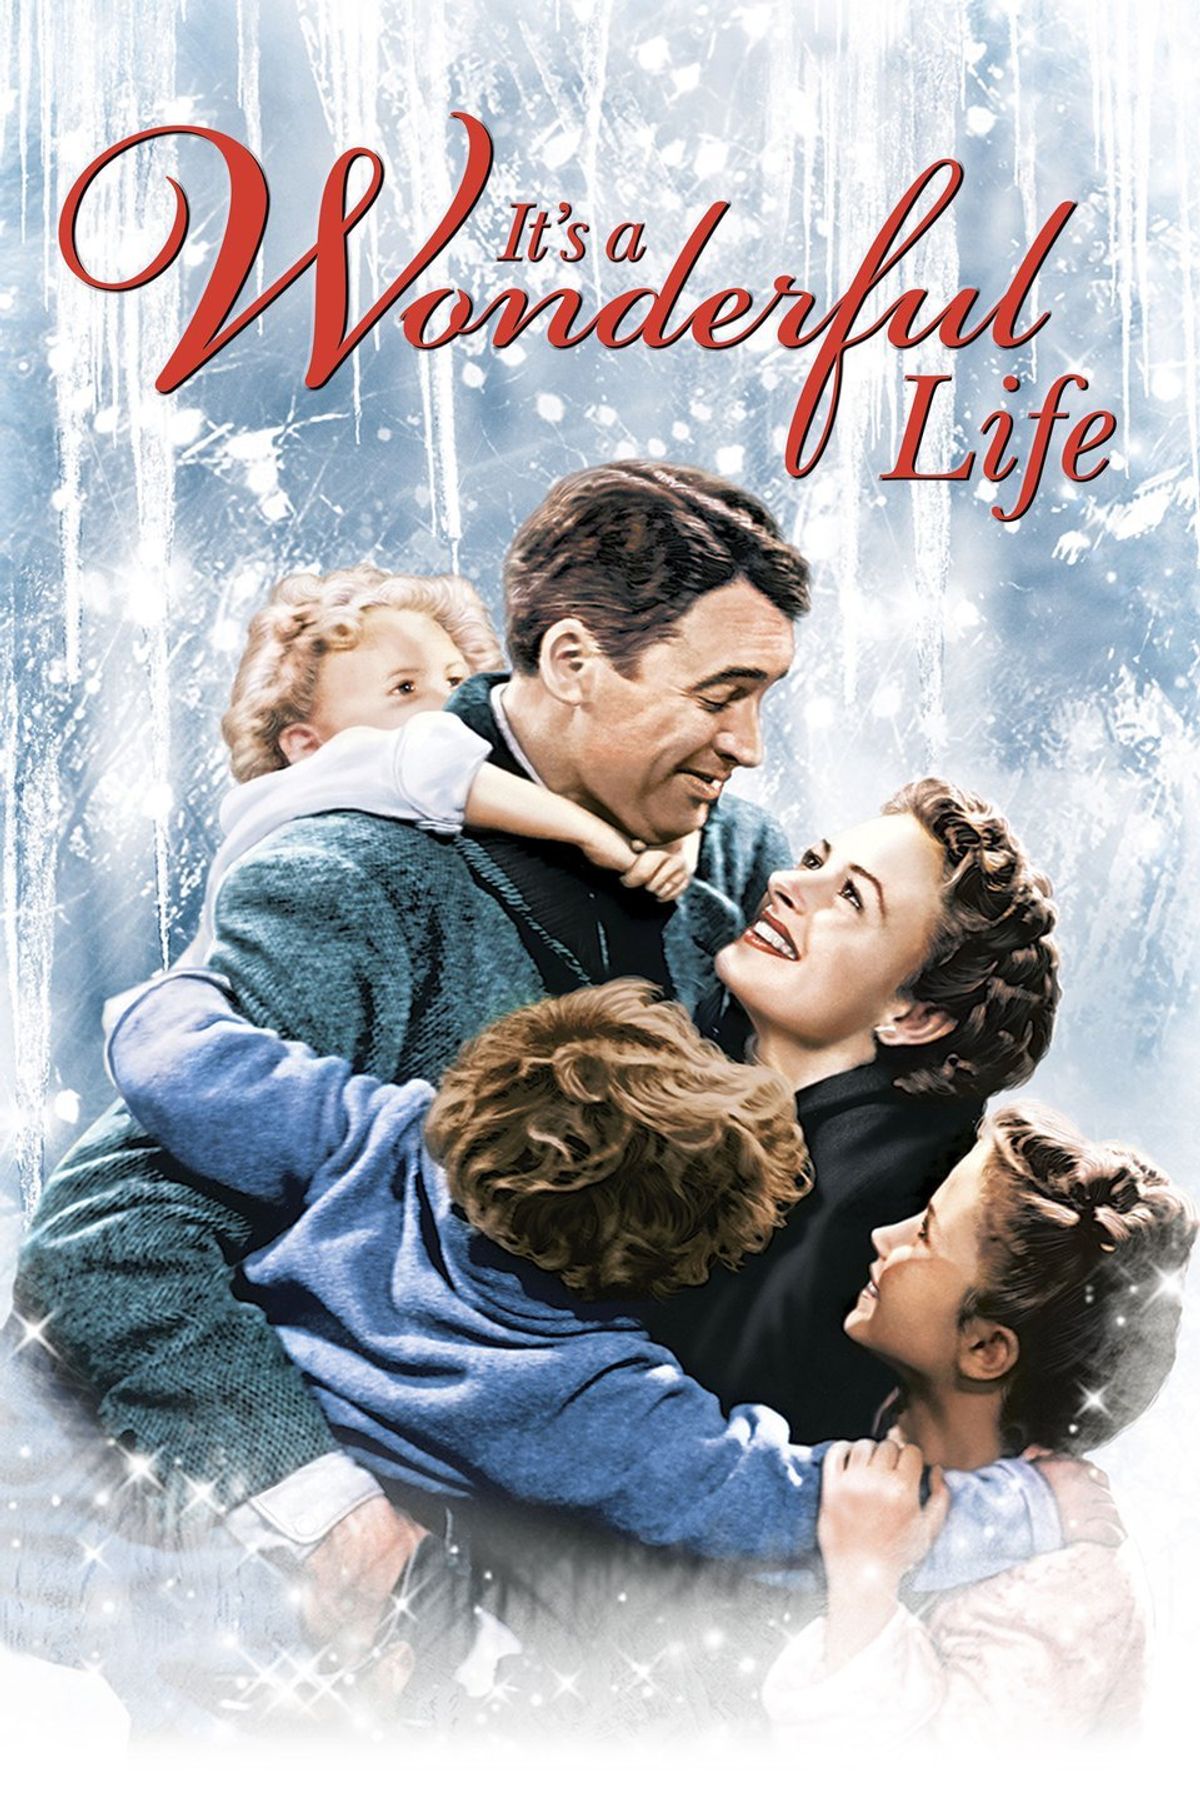 Showtimes for It's a Wonderful Life (1946) Seattle Events Calendar